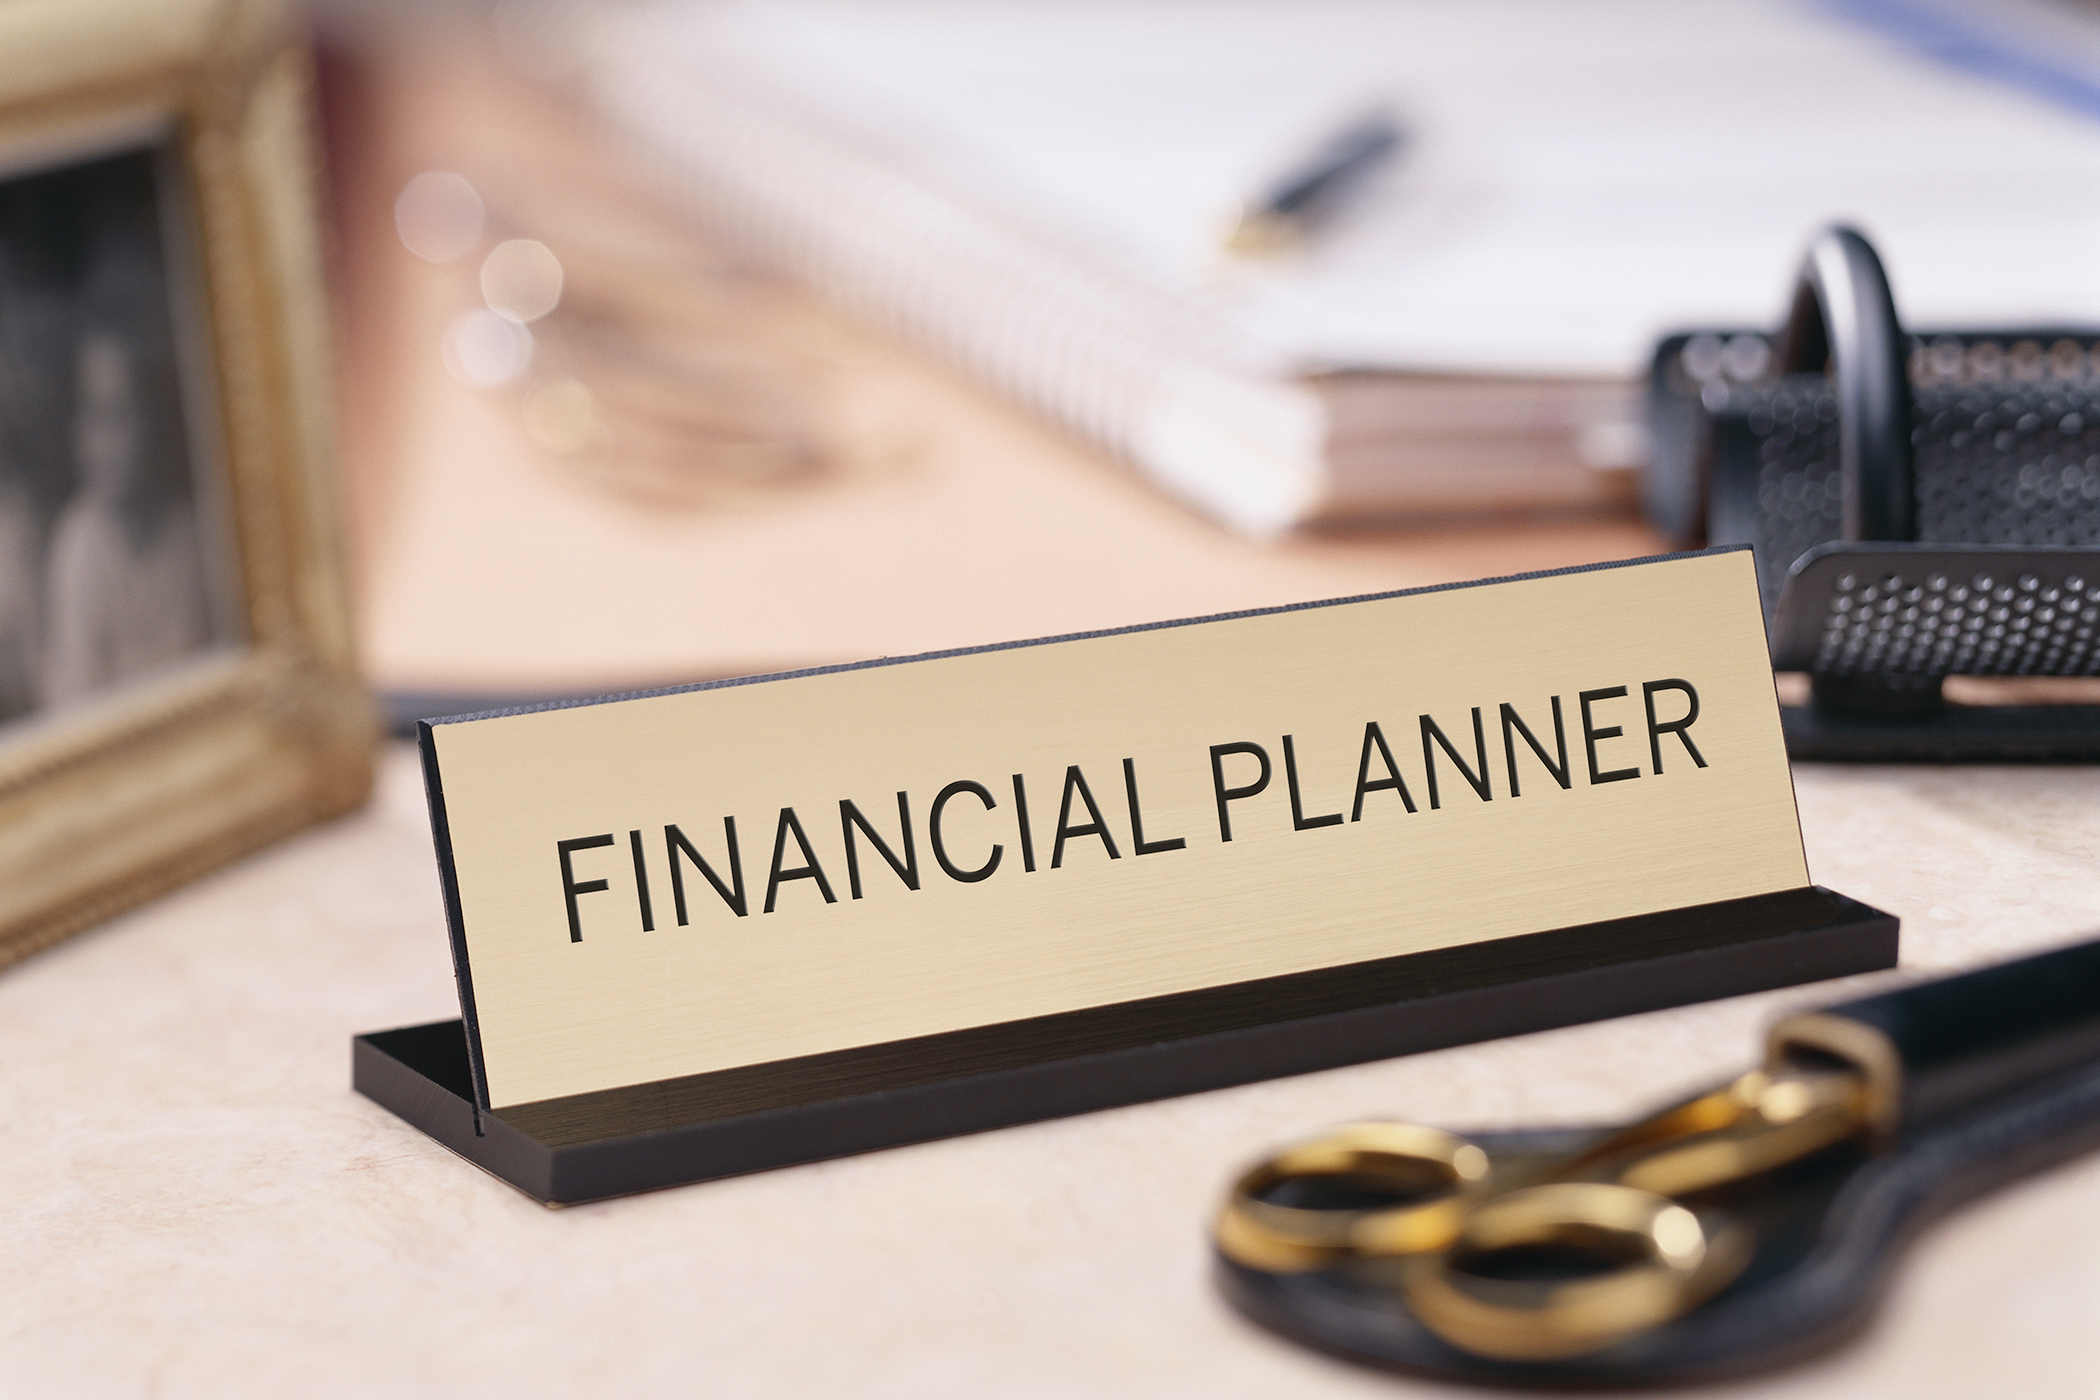 How to Get Started as a Financial Planner